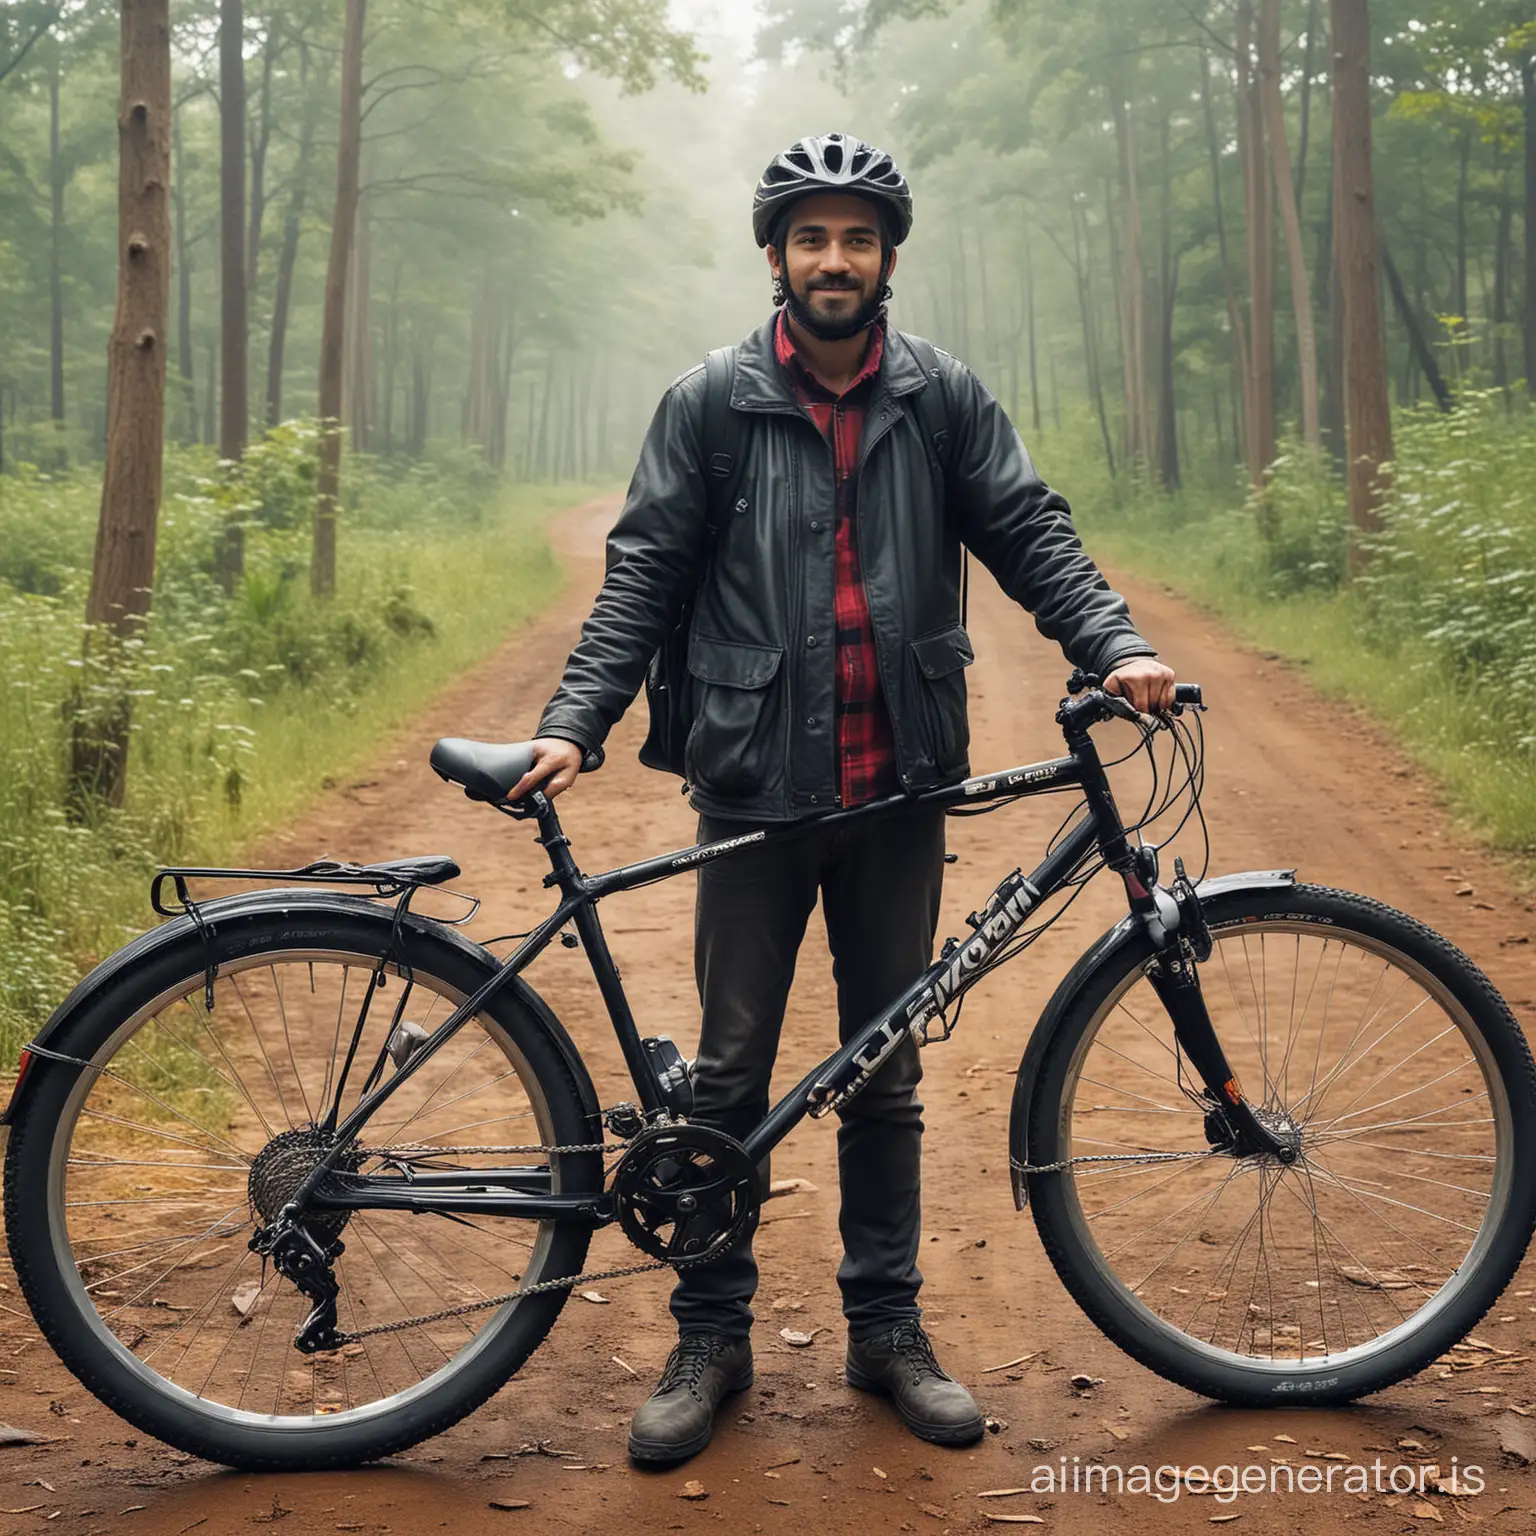 "Generate a photo of a bicycle with its owner standing proudly beside it. The owner should exude a sense of adventure and passion for cycling, perhaps wearing biking gear or holding biking accessories. The setting should be outdoors, preferably in a scenic location such as a park, forest trail, or mountainous terrain. The photo should capture the joy and freedom associated with cycling, with the bike and its owner as the focal points of the image."